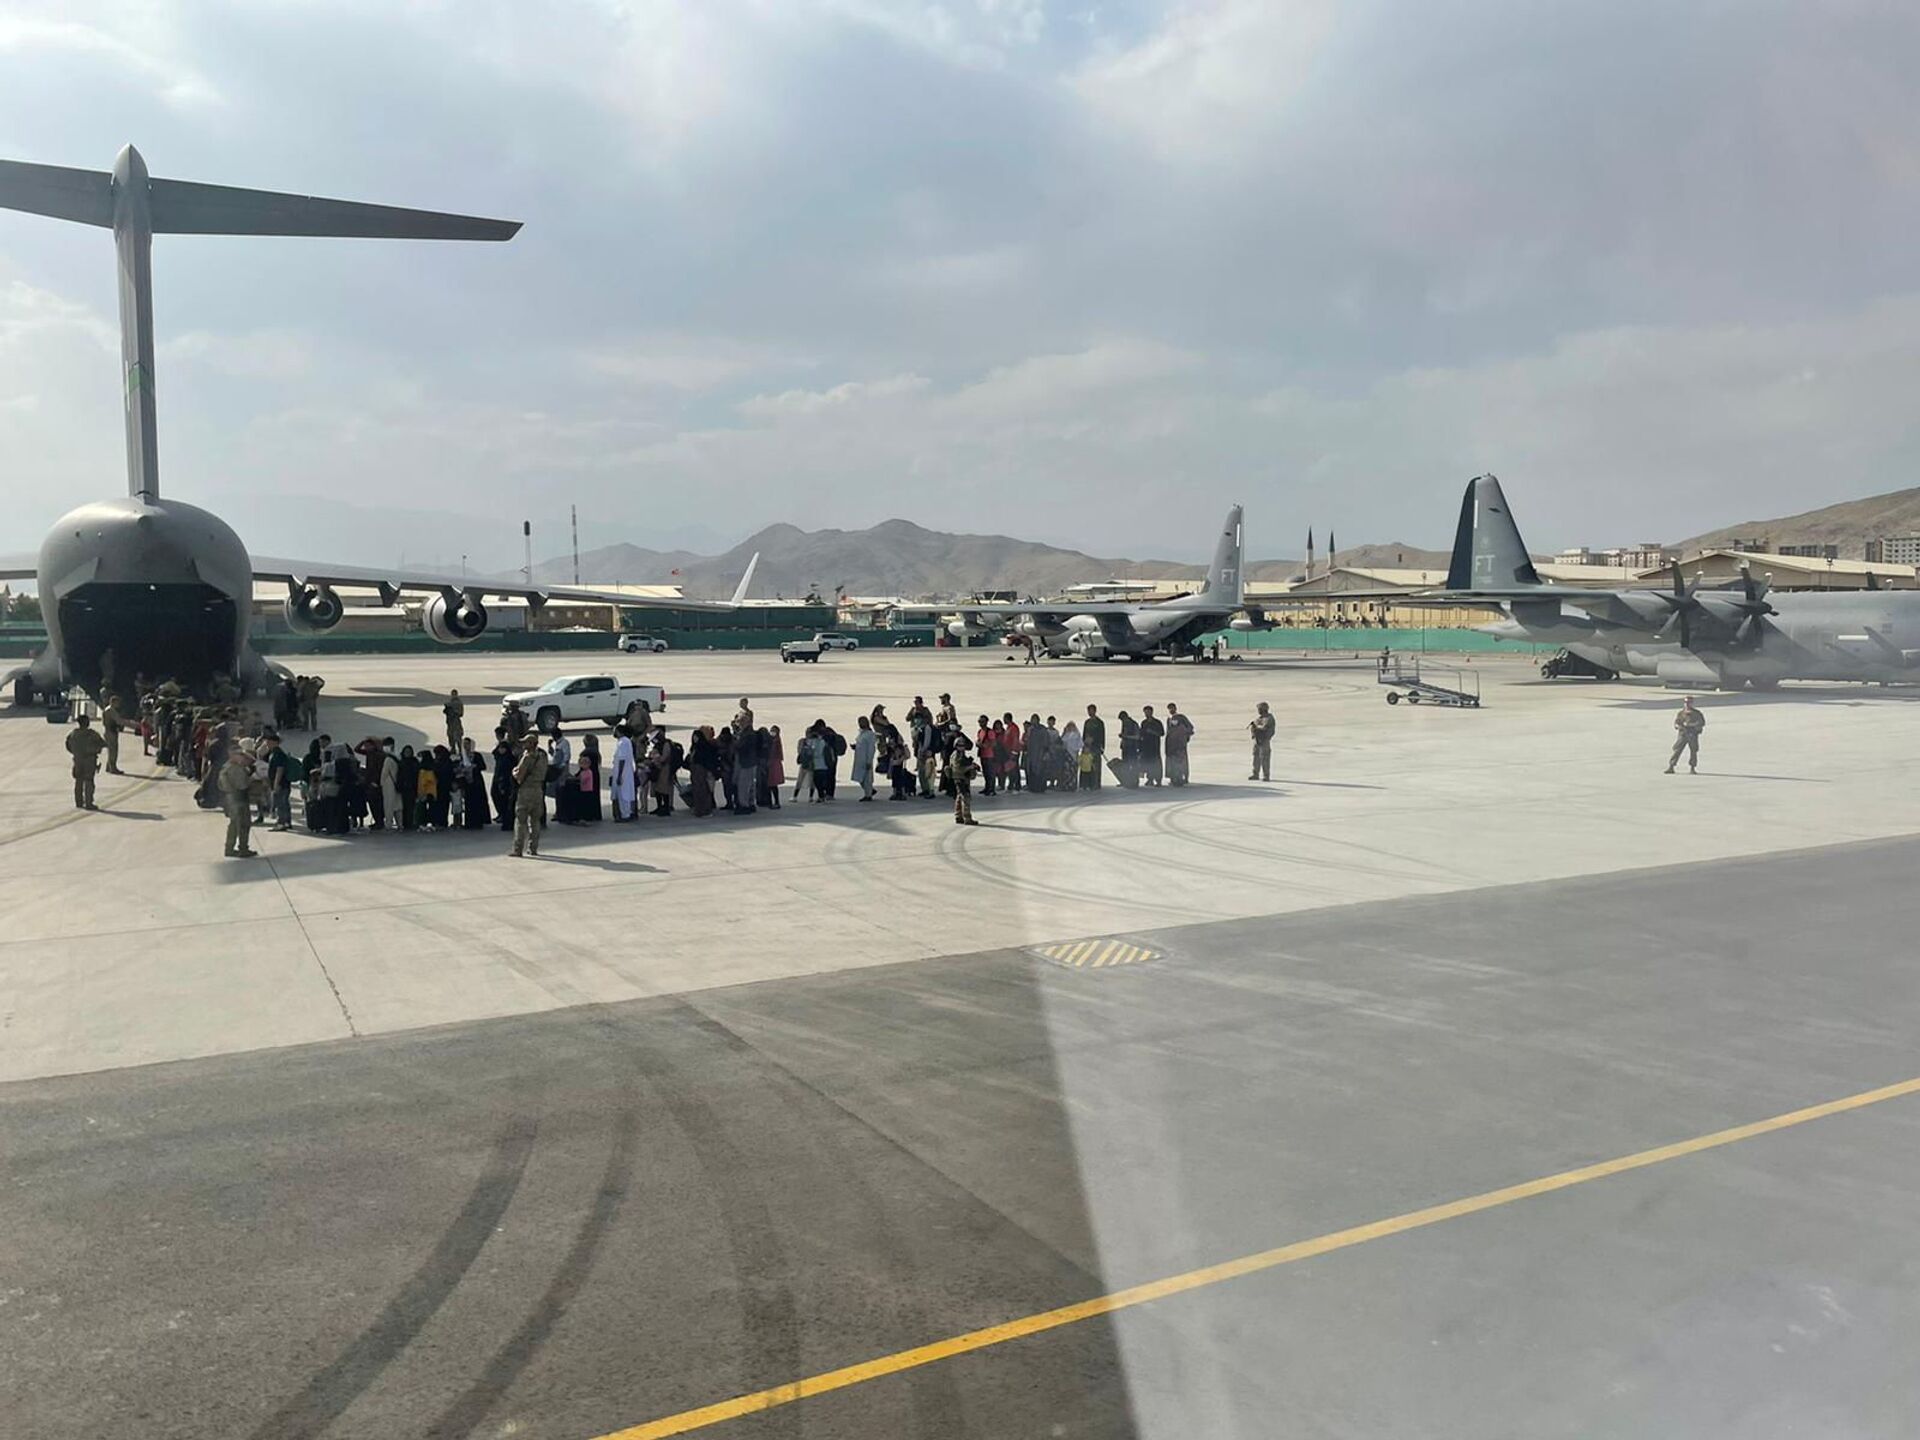 Afghan evacuees queue before boarding one of the last Italy's military aircraft C130J during evacuation at Kabul's airport, Afghanistan, August 27, 2021 - Sputnik International, 1920, 07.09.2021